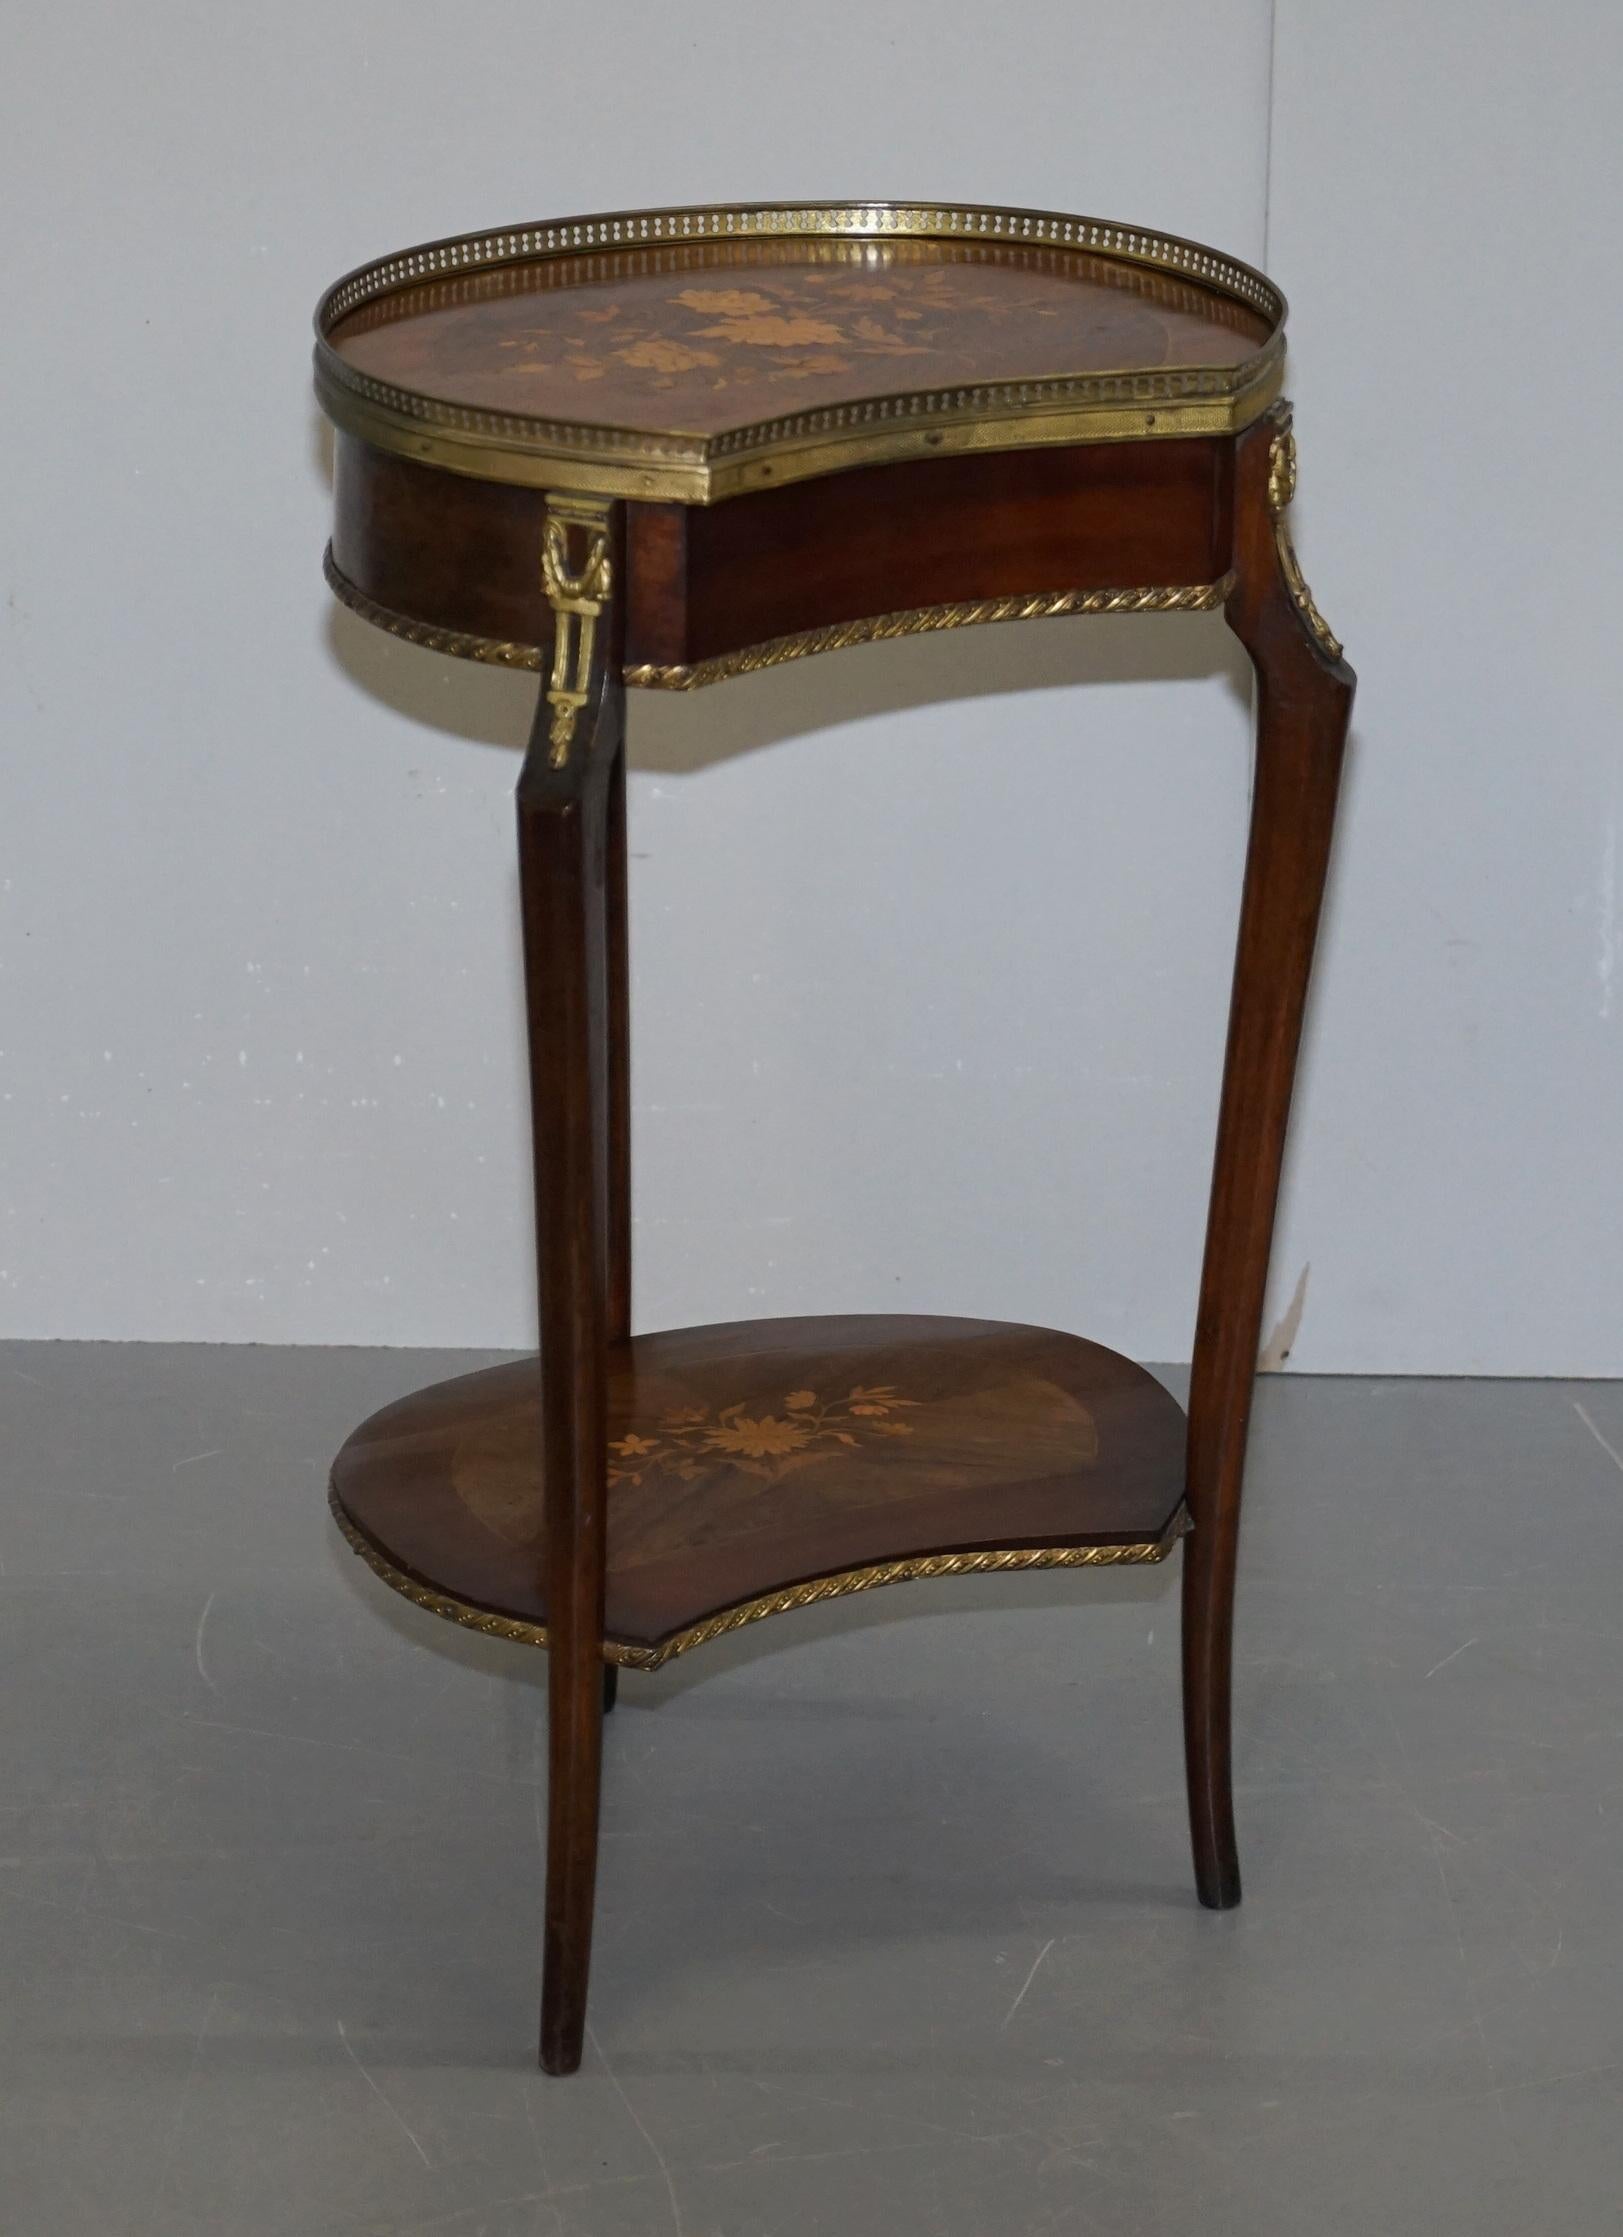 We are delighted to this stunning pair of Antique French Louis XVI brass gallery rail marquetry inlaid side tables

A very good looking and decorative pair of side tables, they have bronze gilded brass fittings all-over, the gallery rail to the